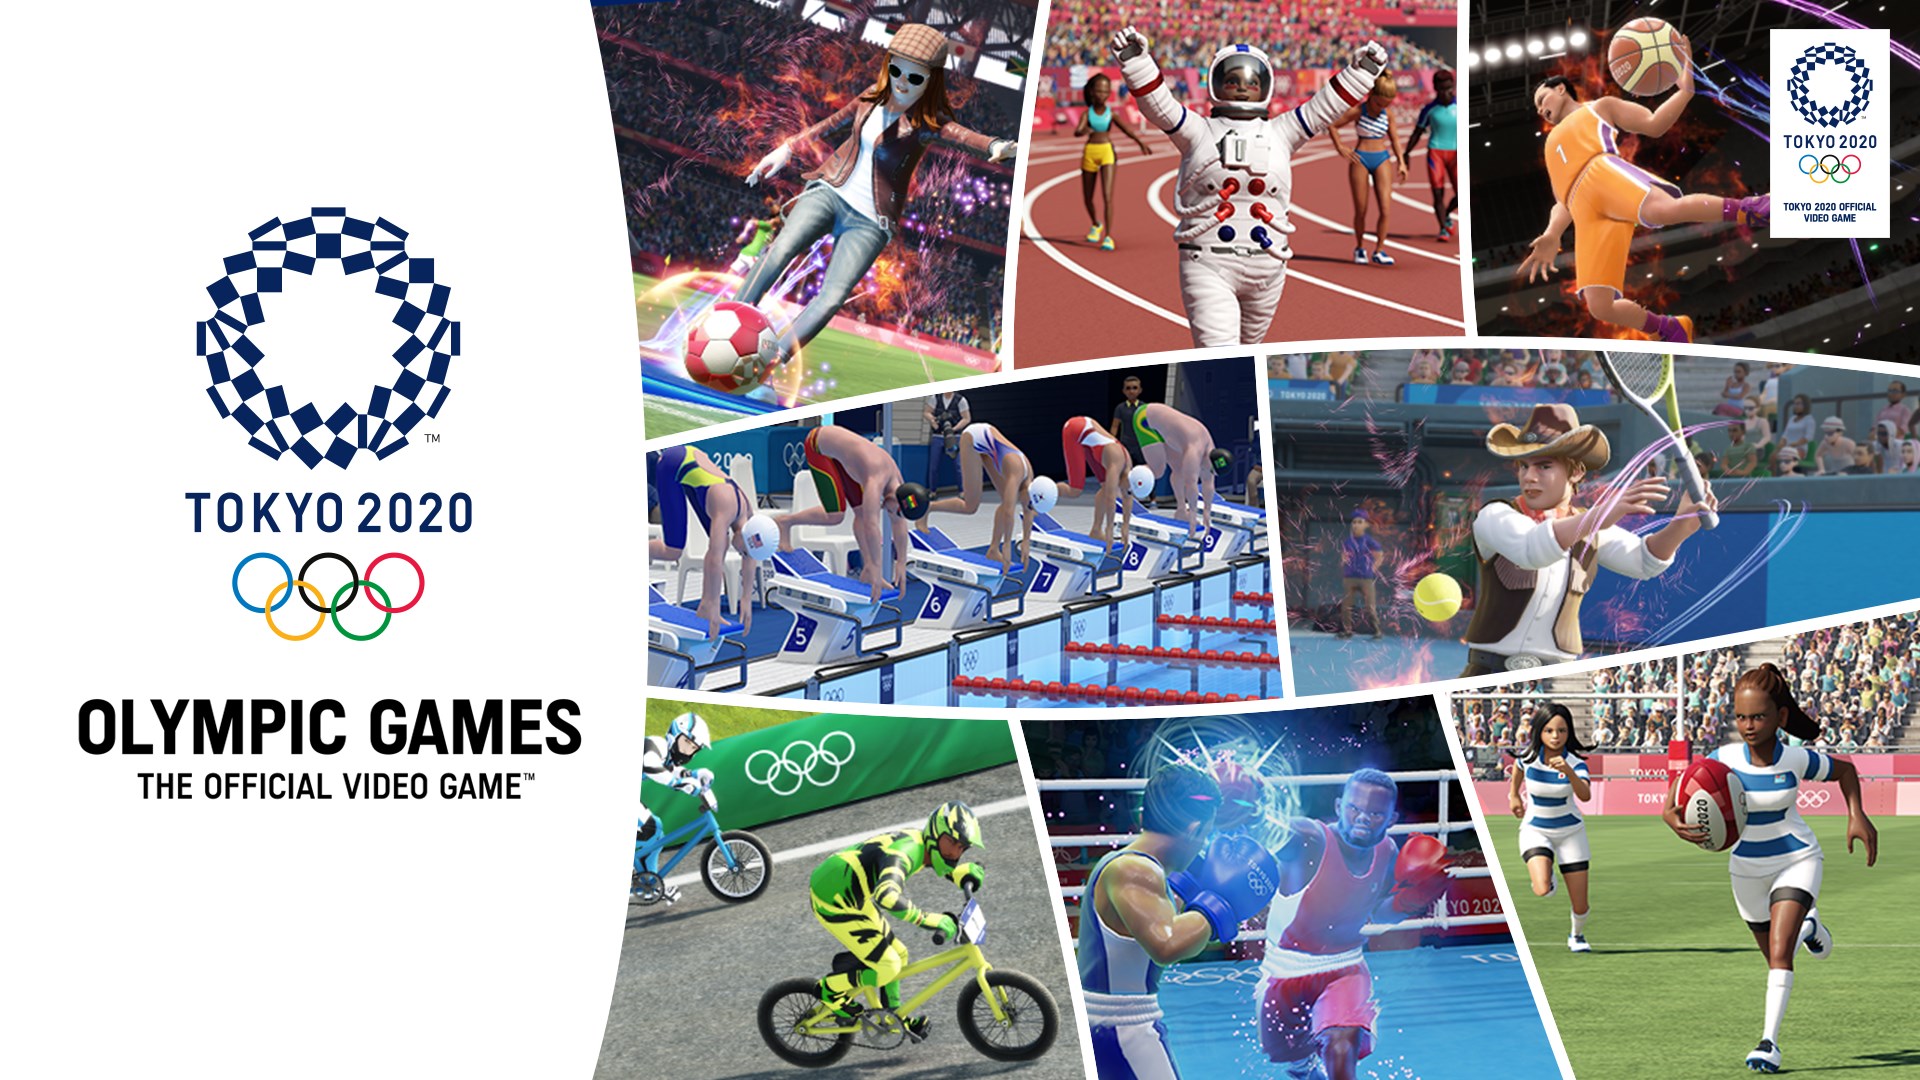 Video For Olympic Games Tokyo 2020 – The Official Video Game Is Now Available For Xbox One And Xbox Series X|S